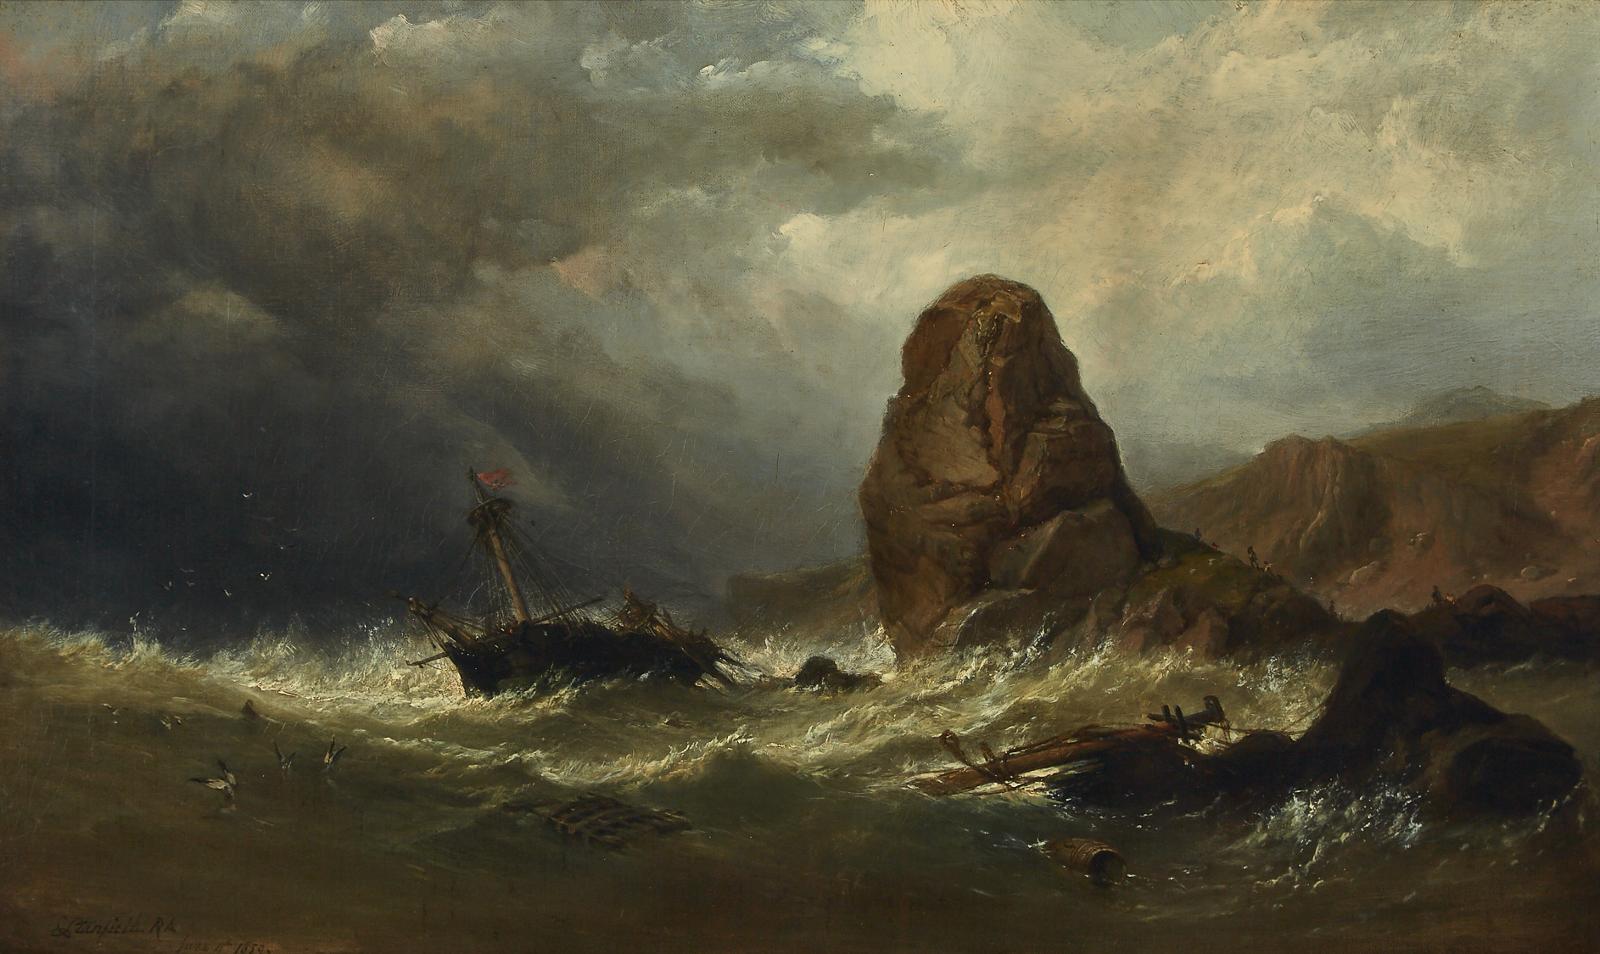 Clarkson Frederick Stanfield (1793-1867) - Shipwreck With Figures To The Rescue, June 11, 1859